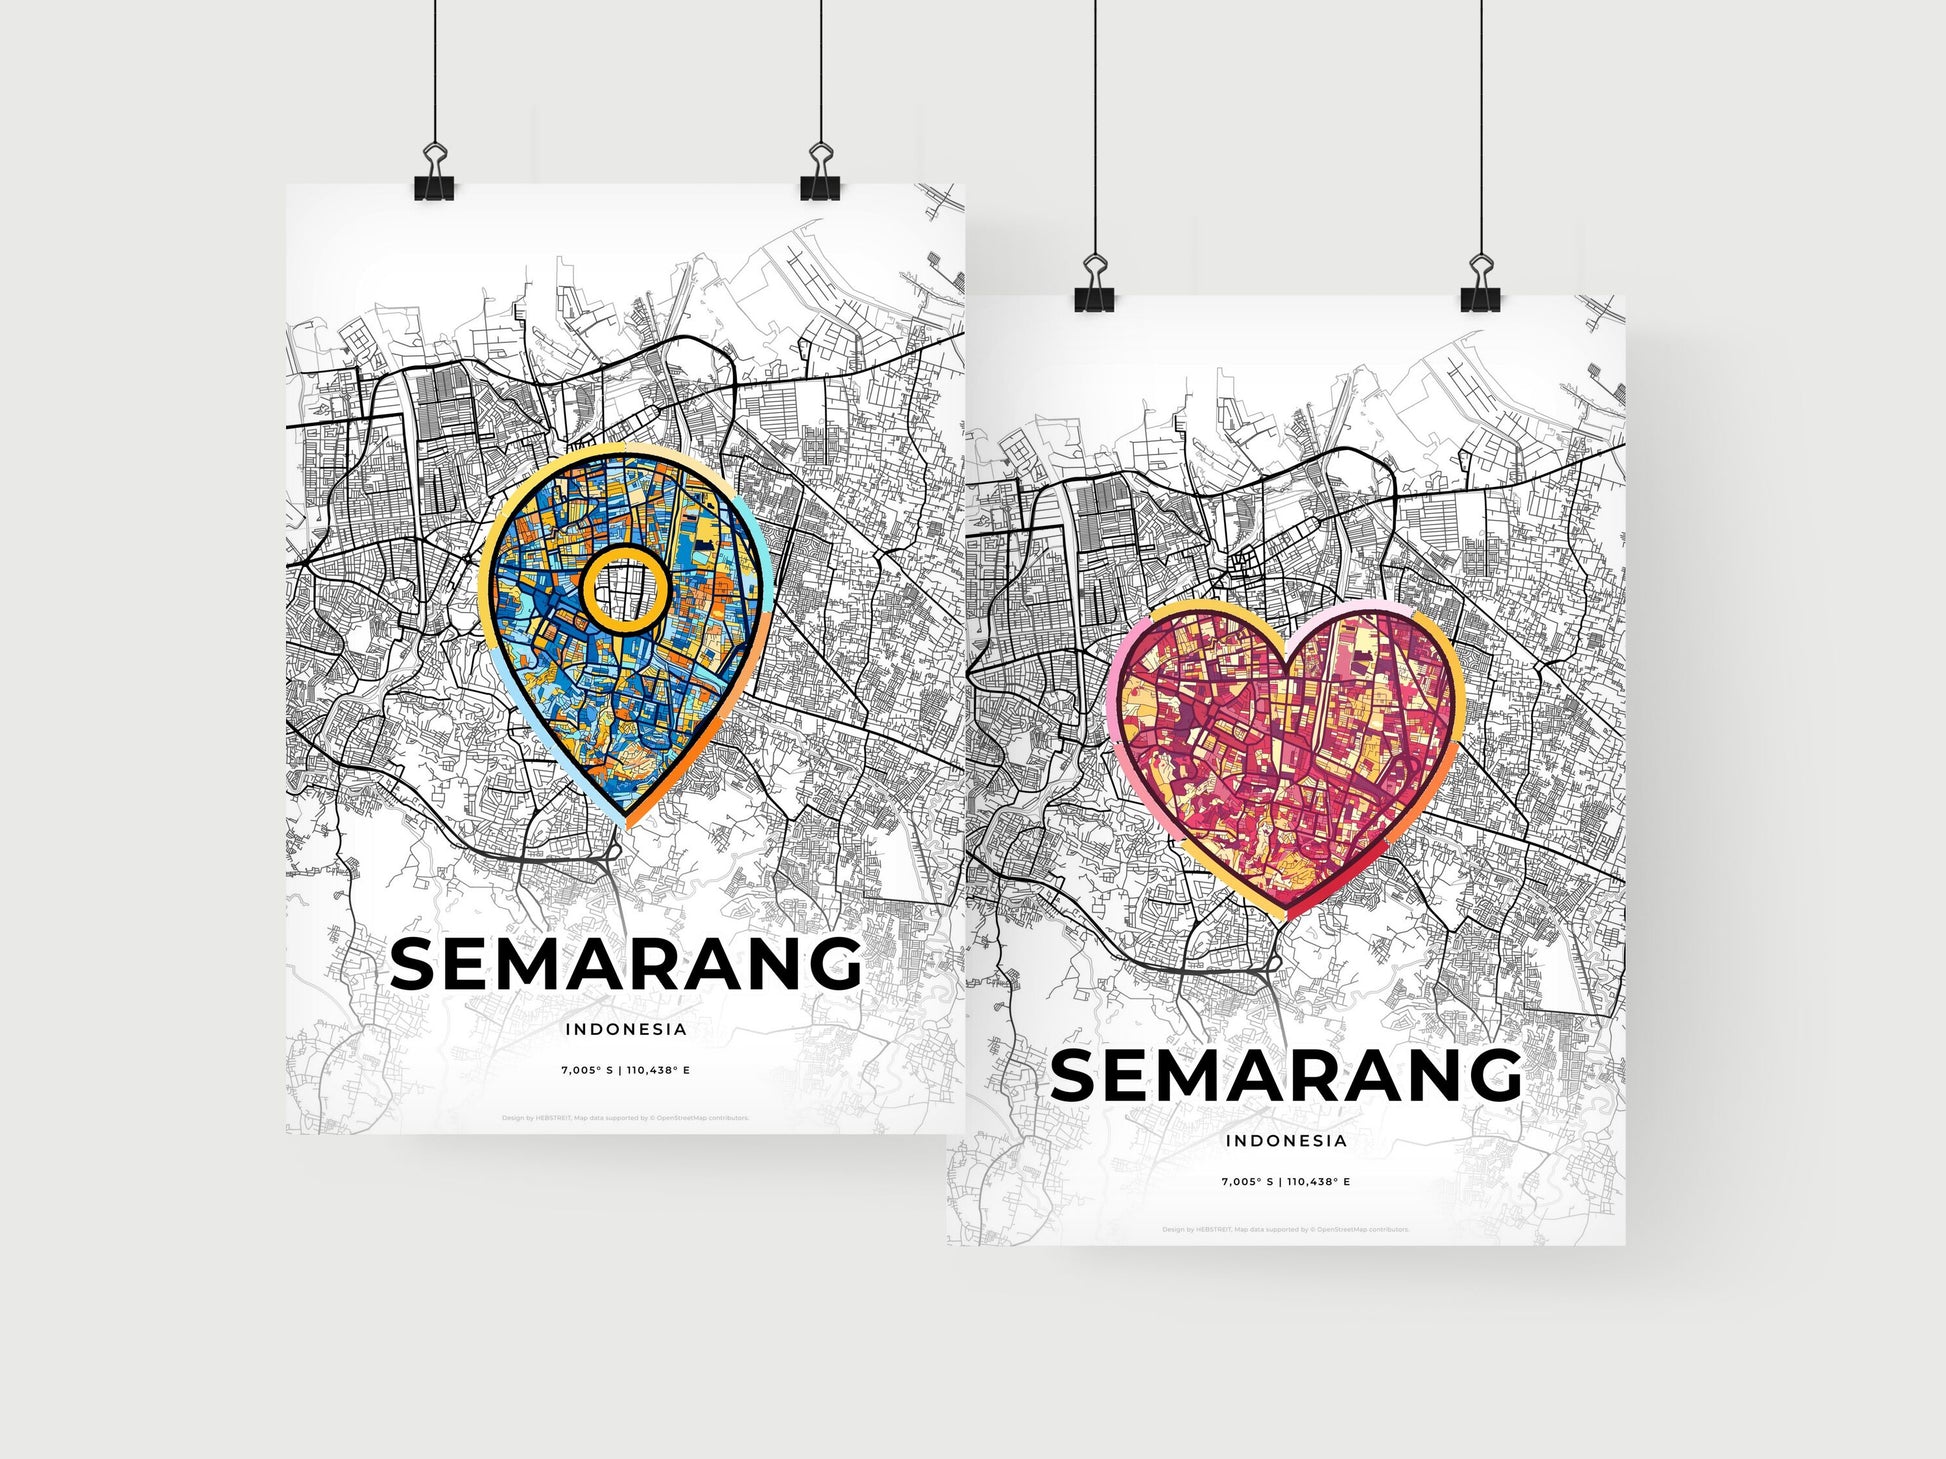 SEMARANG INDONESIA minimal art map with a colorful icon.